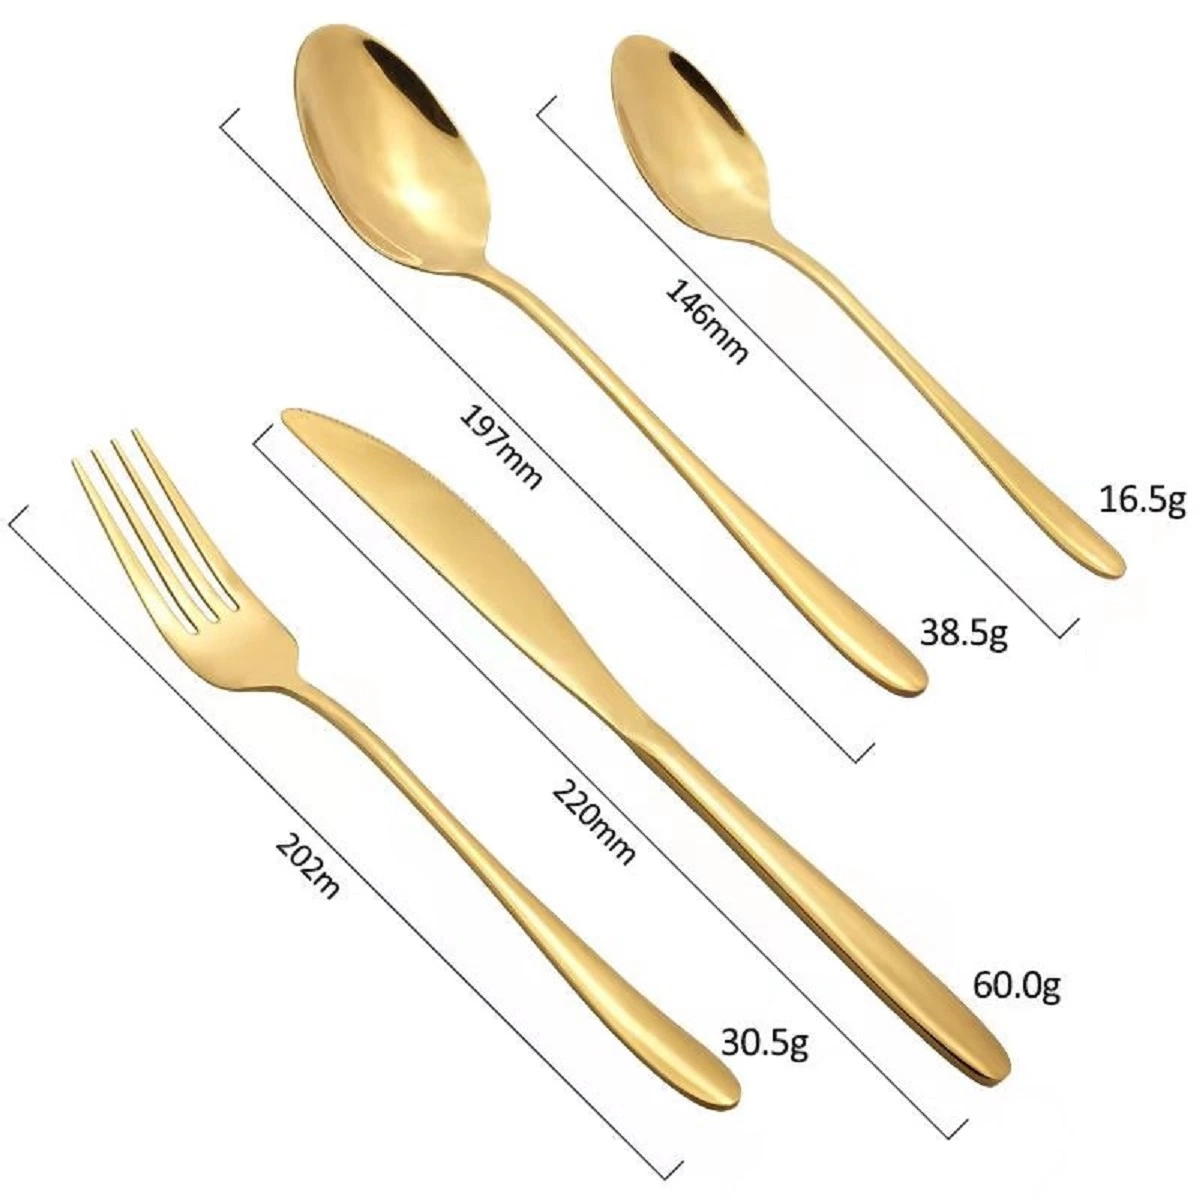 Wholesale/Supplier Fork Knife Spoon Portable Travel Camping Wedding Flatware Polished Stainless Steel Cutlery Set 16PCS with Wooden Box